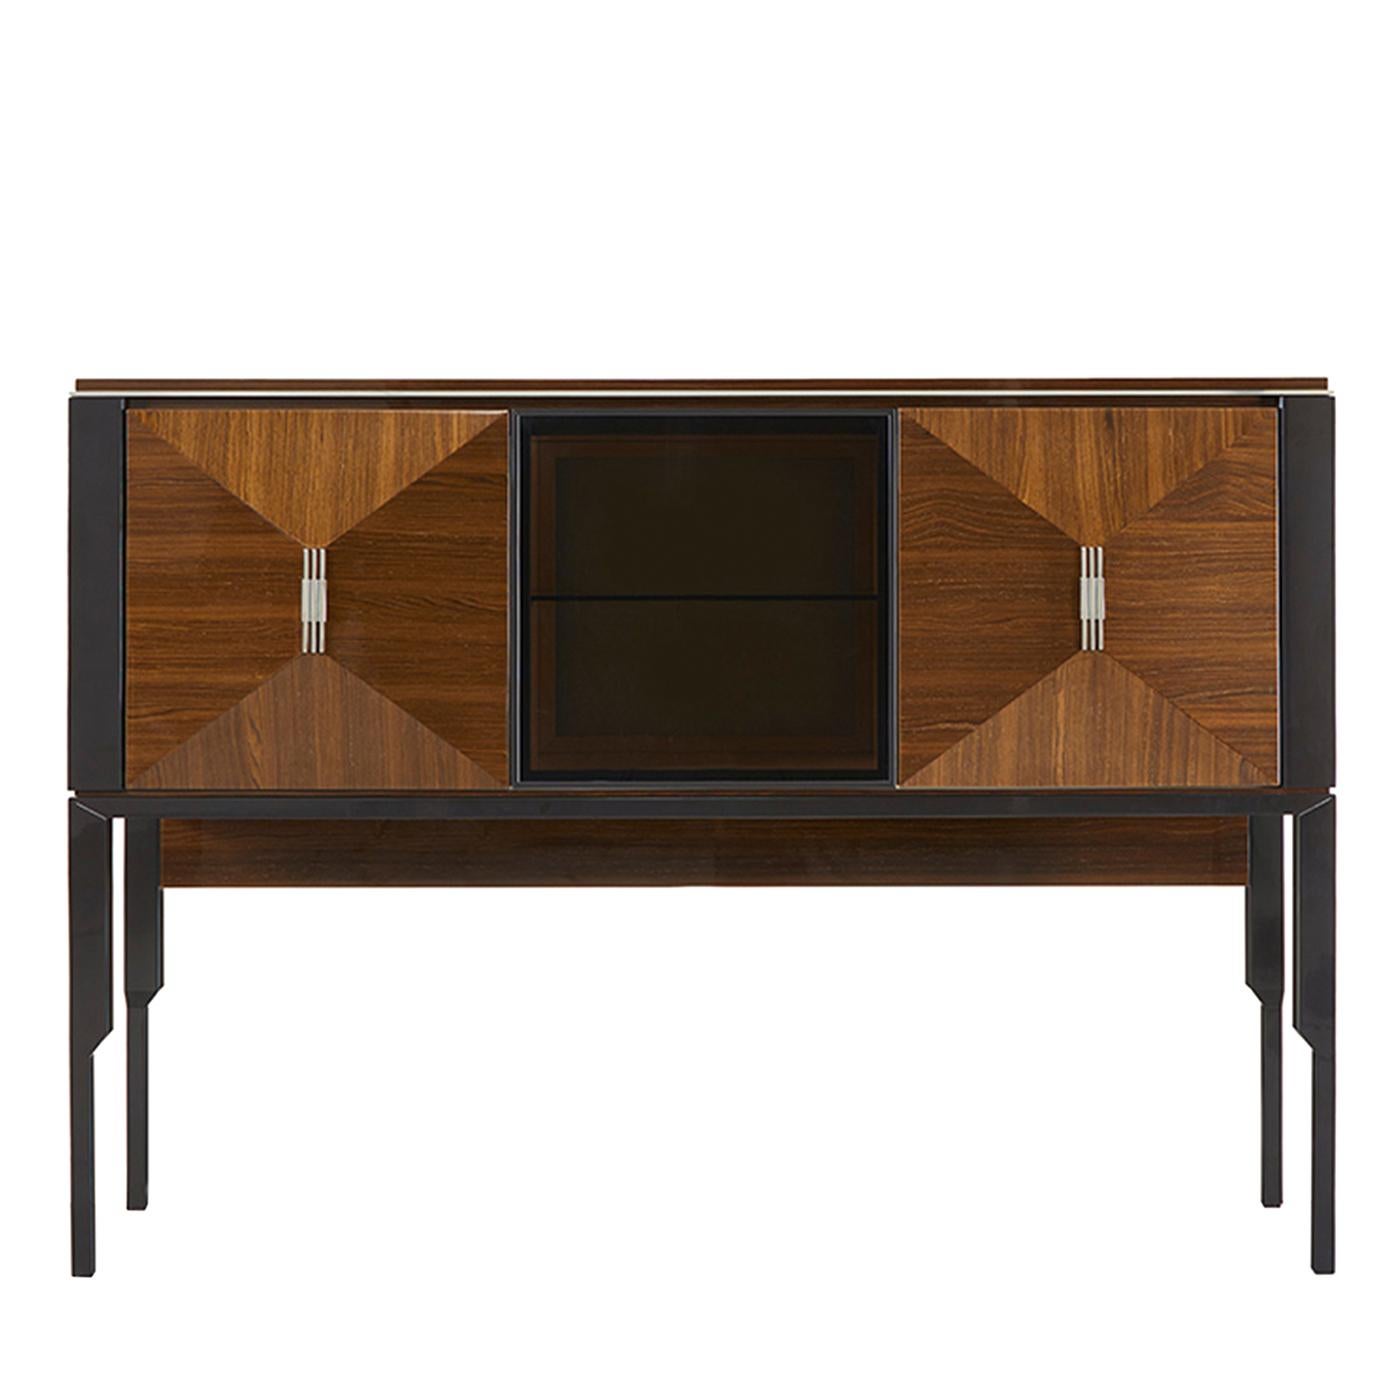 This elegant bar unit has two wooden doors and a glass one, with metal trims and lacquered legs. Wooden shelves and push pull opening complete the design. Canaletto glossy finish and Testa di Moro glossy lacquered frame finish are combined with